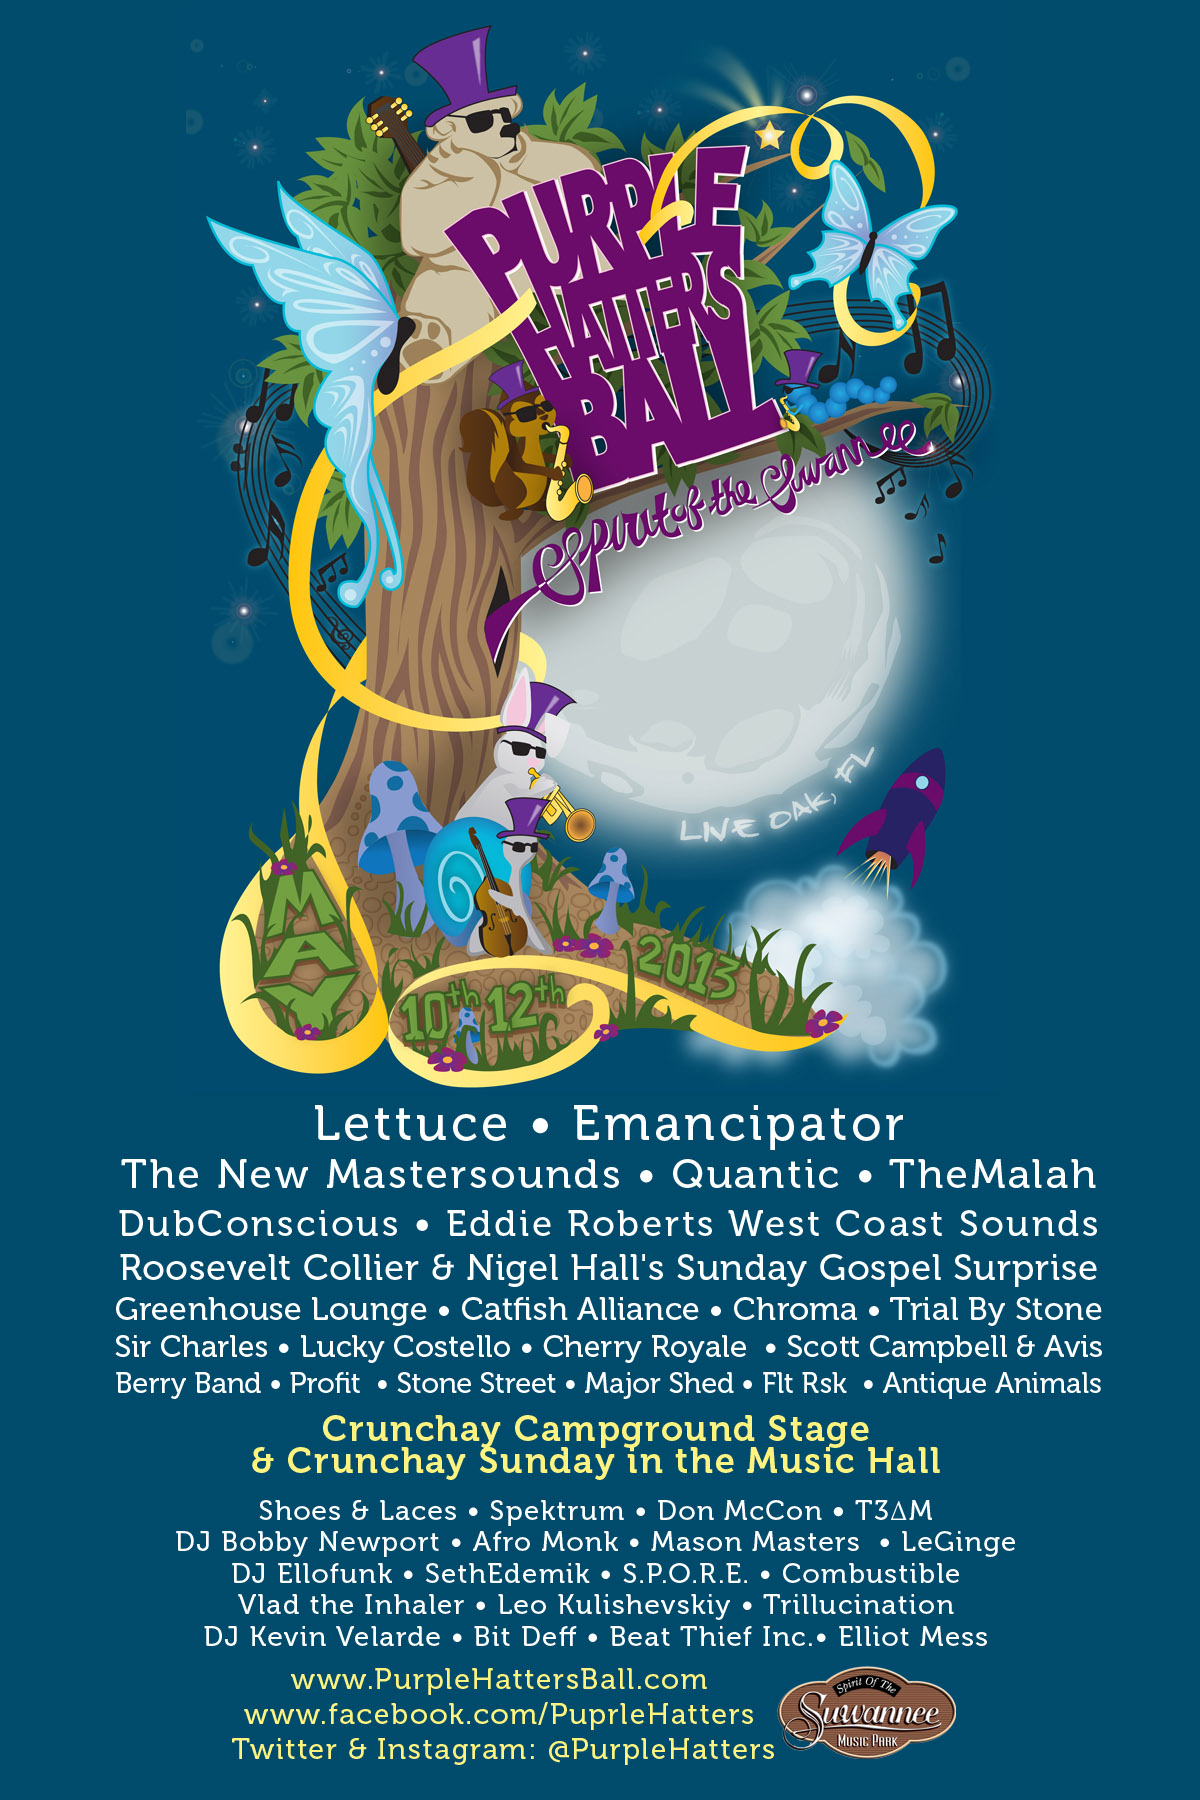 Big Announcements for Purple Hatter’s Ball, May 10-12, Live Oak, FL